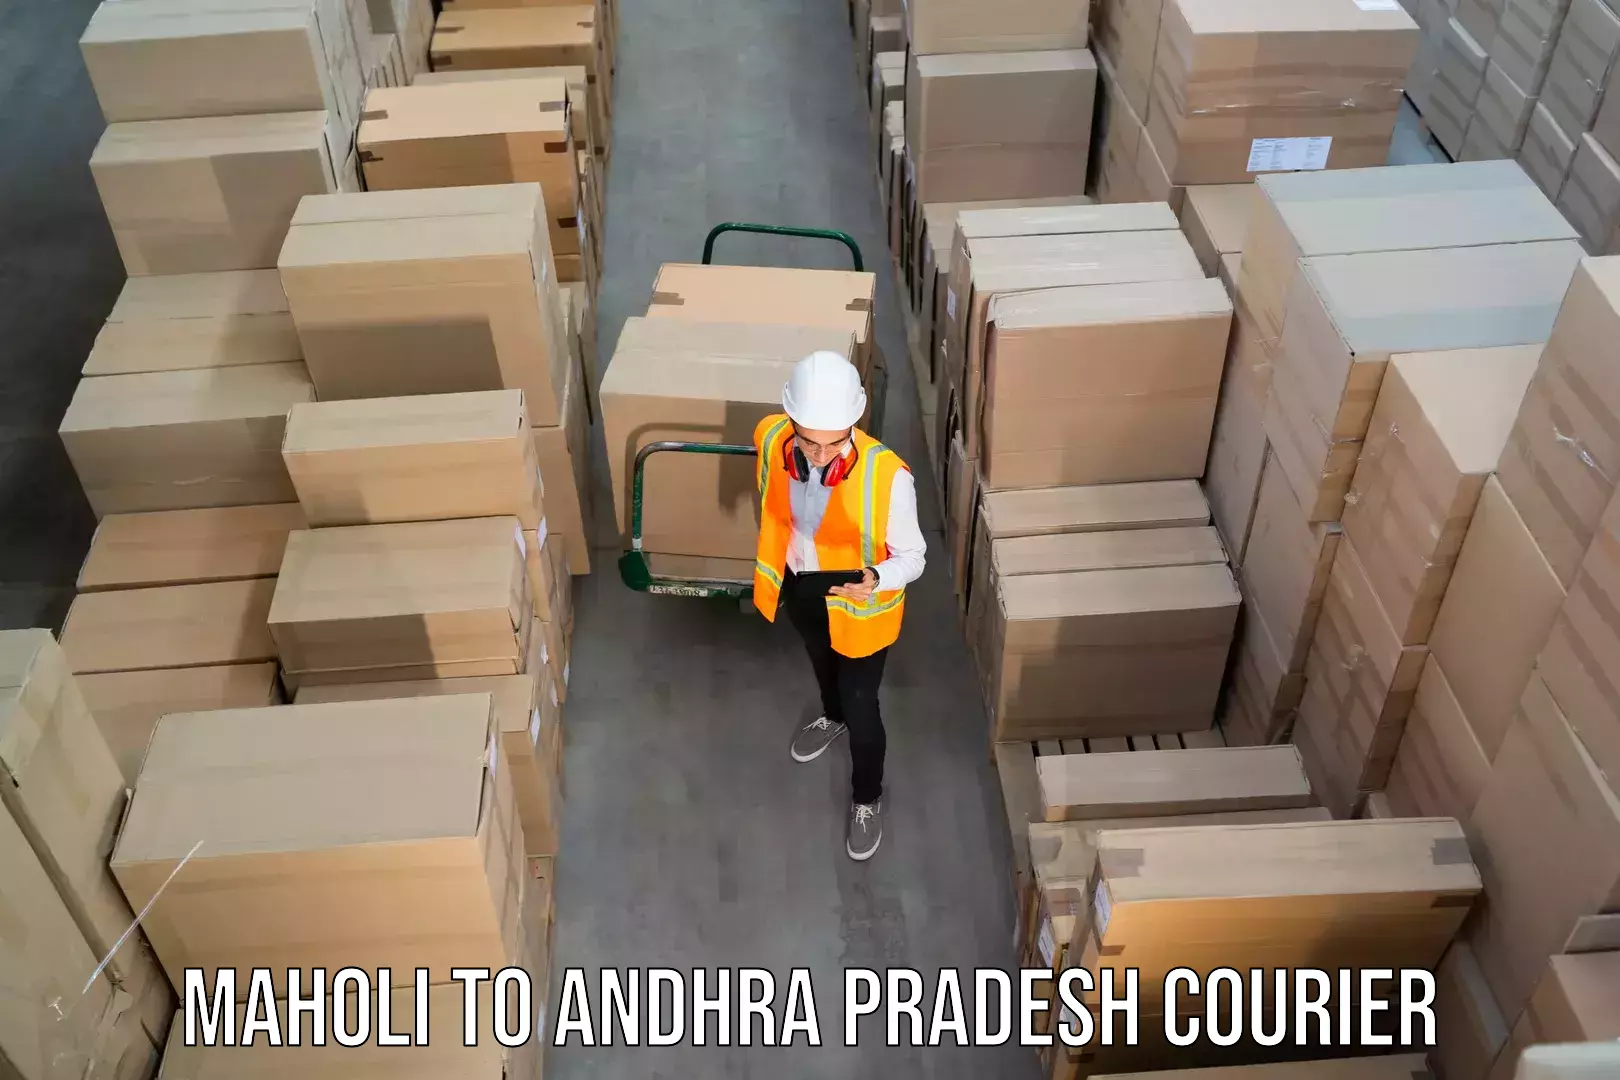 Reliable courier service in Maholi to Andhra Pradesh